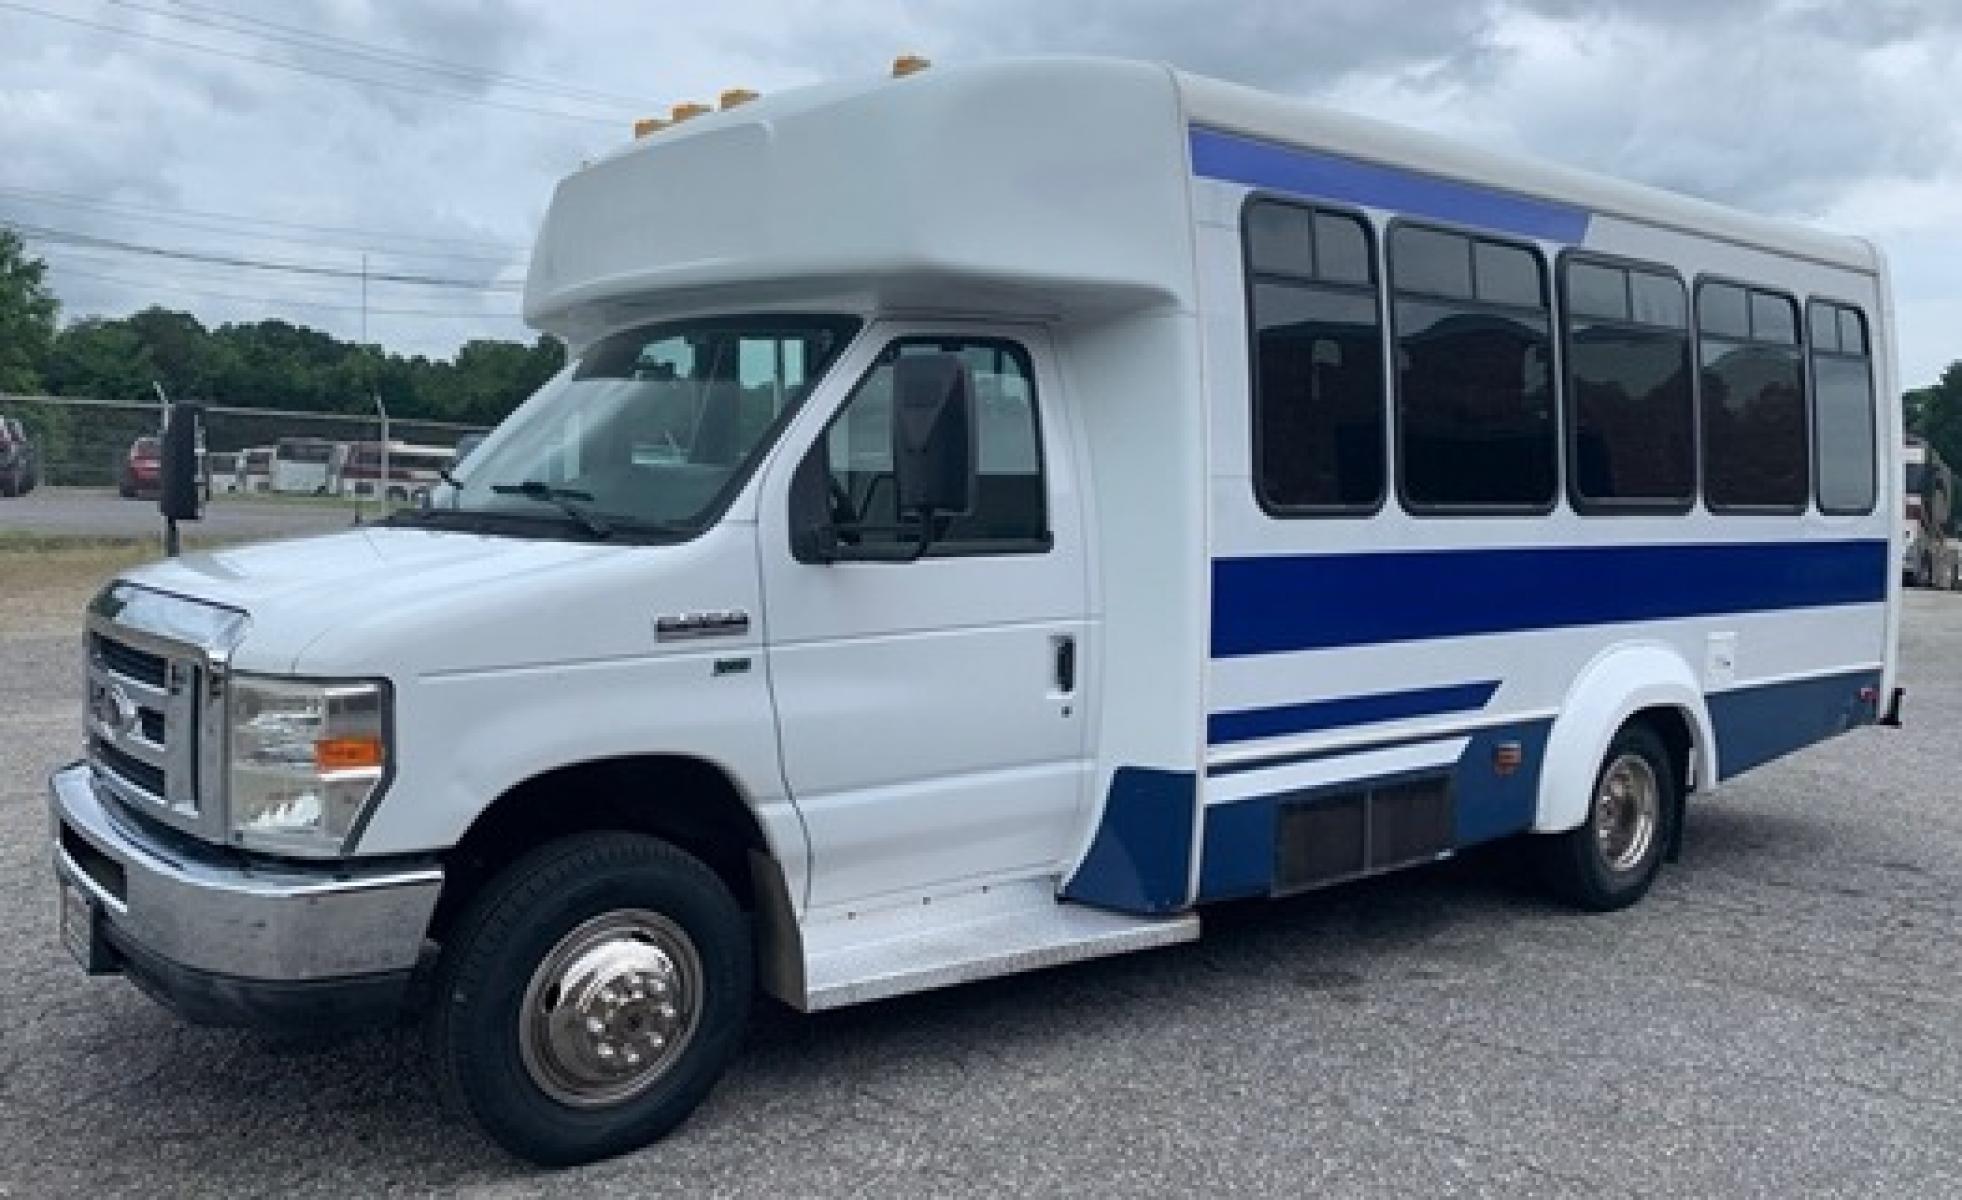 2009 White Ford E350 with an V8 engine, Auto transmission, 0.000000, 0.000000 - 2009 Ford E-350 Elkhart Conversion,- 5.4L V8 Gas Engine - Automatic Trans - Electric Entrance Door - 14 Passengers & Driver - 12 + 1 Wheelchair - High Back Seats - Retractable Seat Belts - Stainless Wheel Simulators - Front and Rear A/C - Handicap Lift - Photo #5